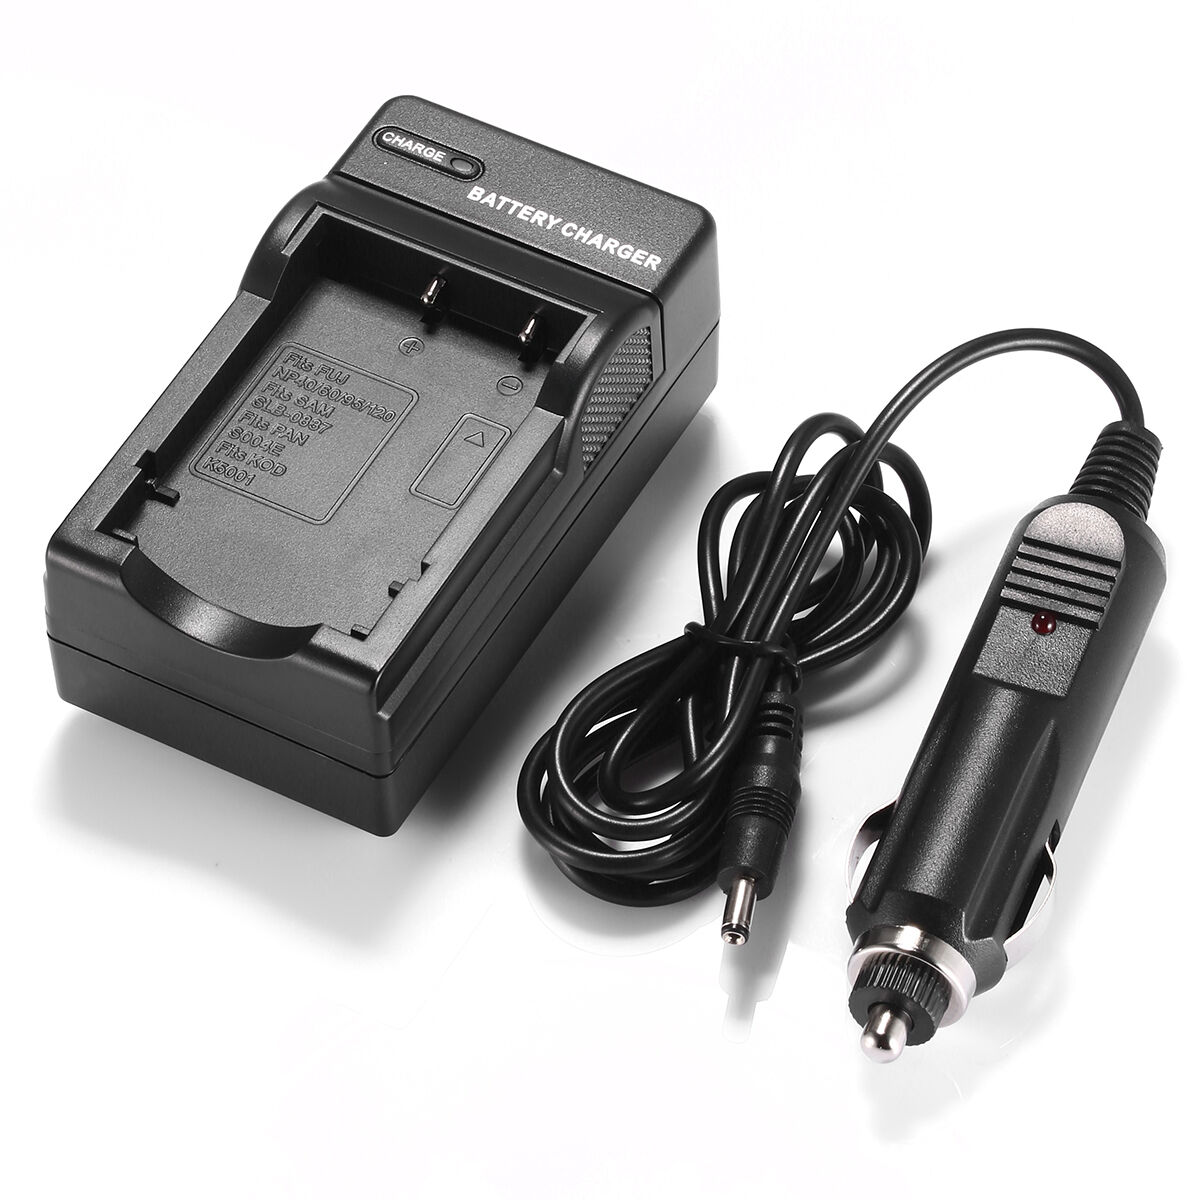 CASIO Exilim EX-S10BK battery charger